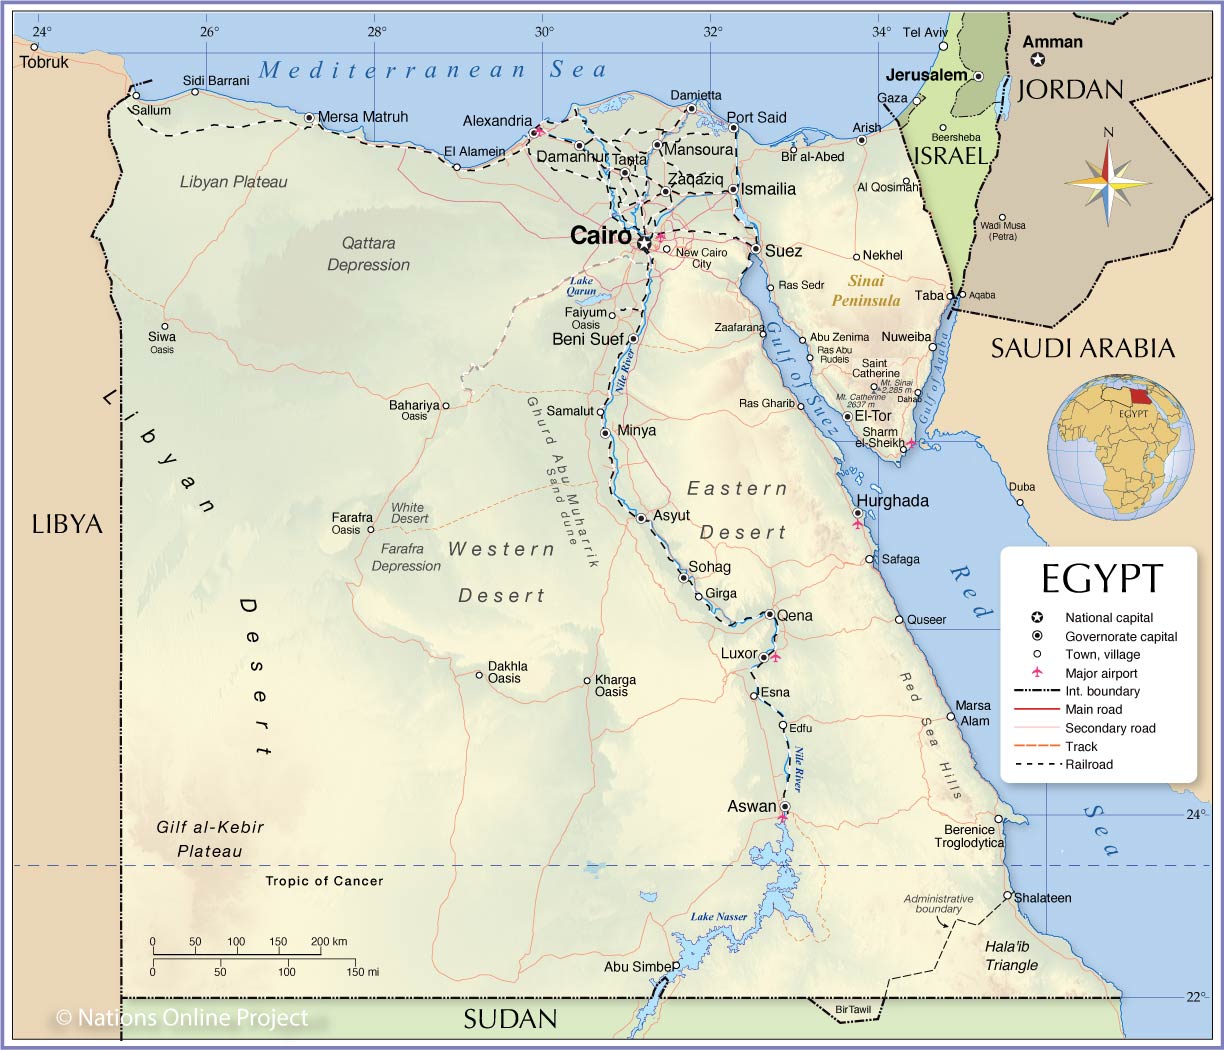 Map showing Egypt and surrounding countries